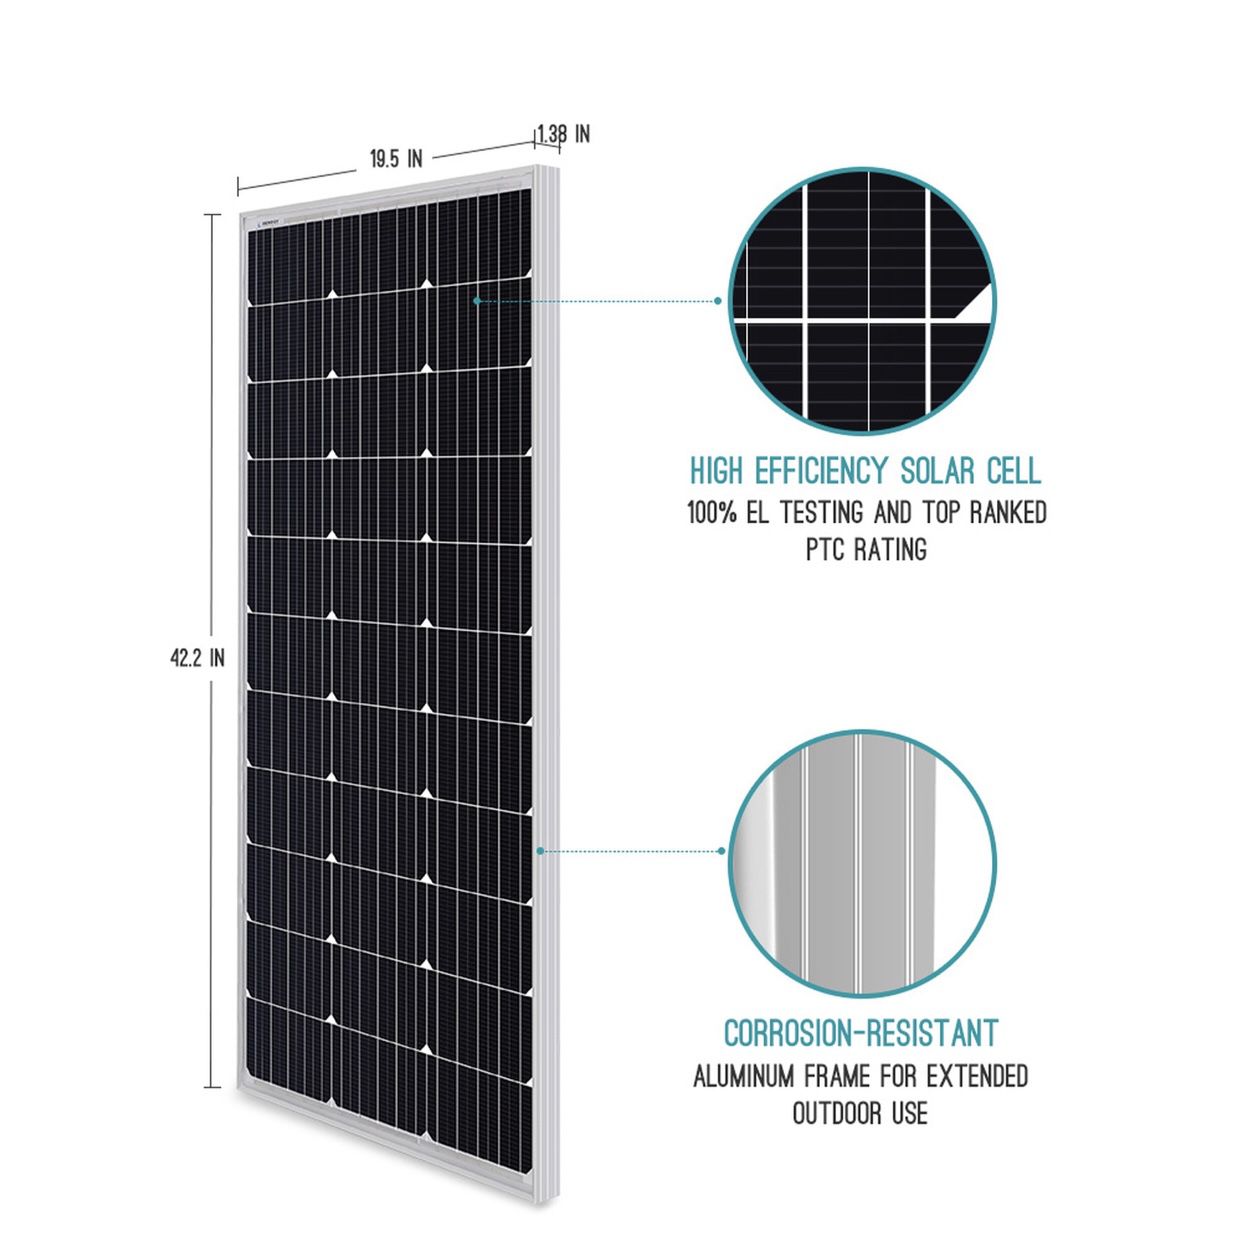 Renogy 100 Watt 12 Volt Monocrystalline Solar Panel Compact Design. High Efficiency Module PV Power for Battery Charging Any Other Off Grid Applicati